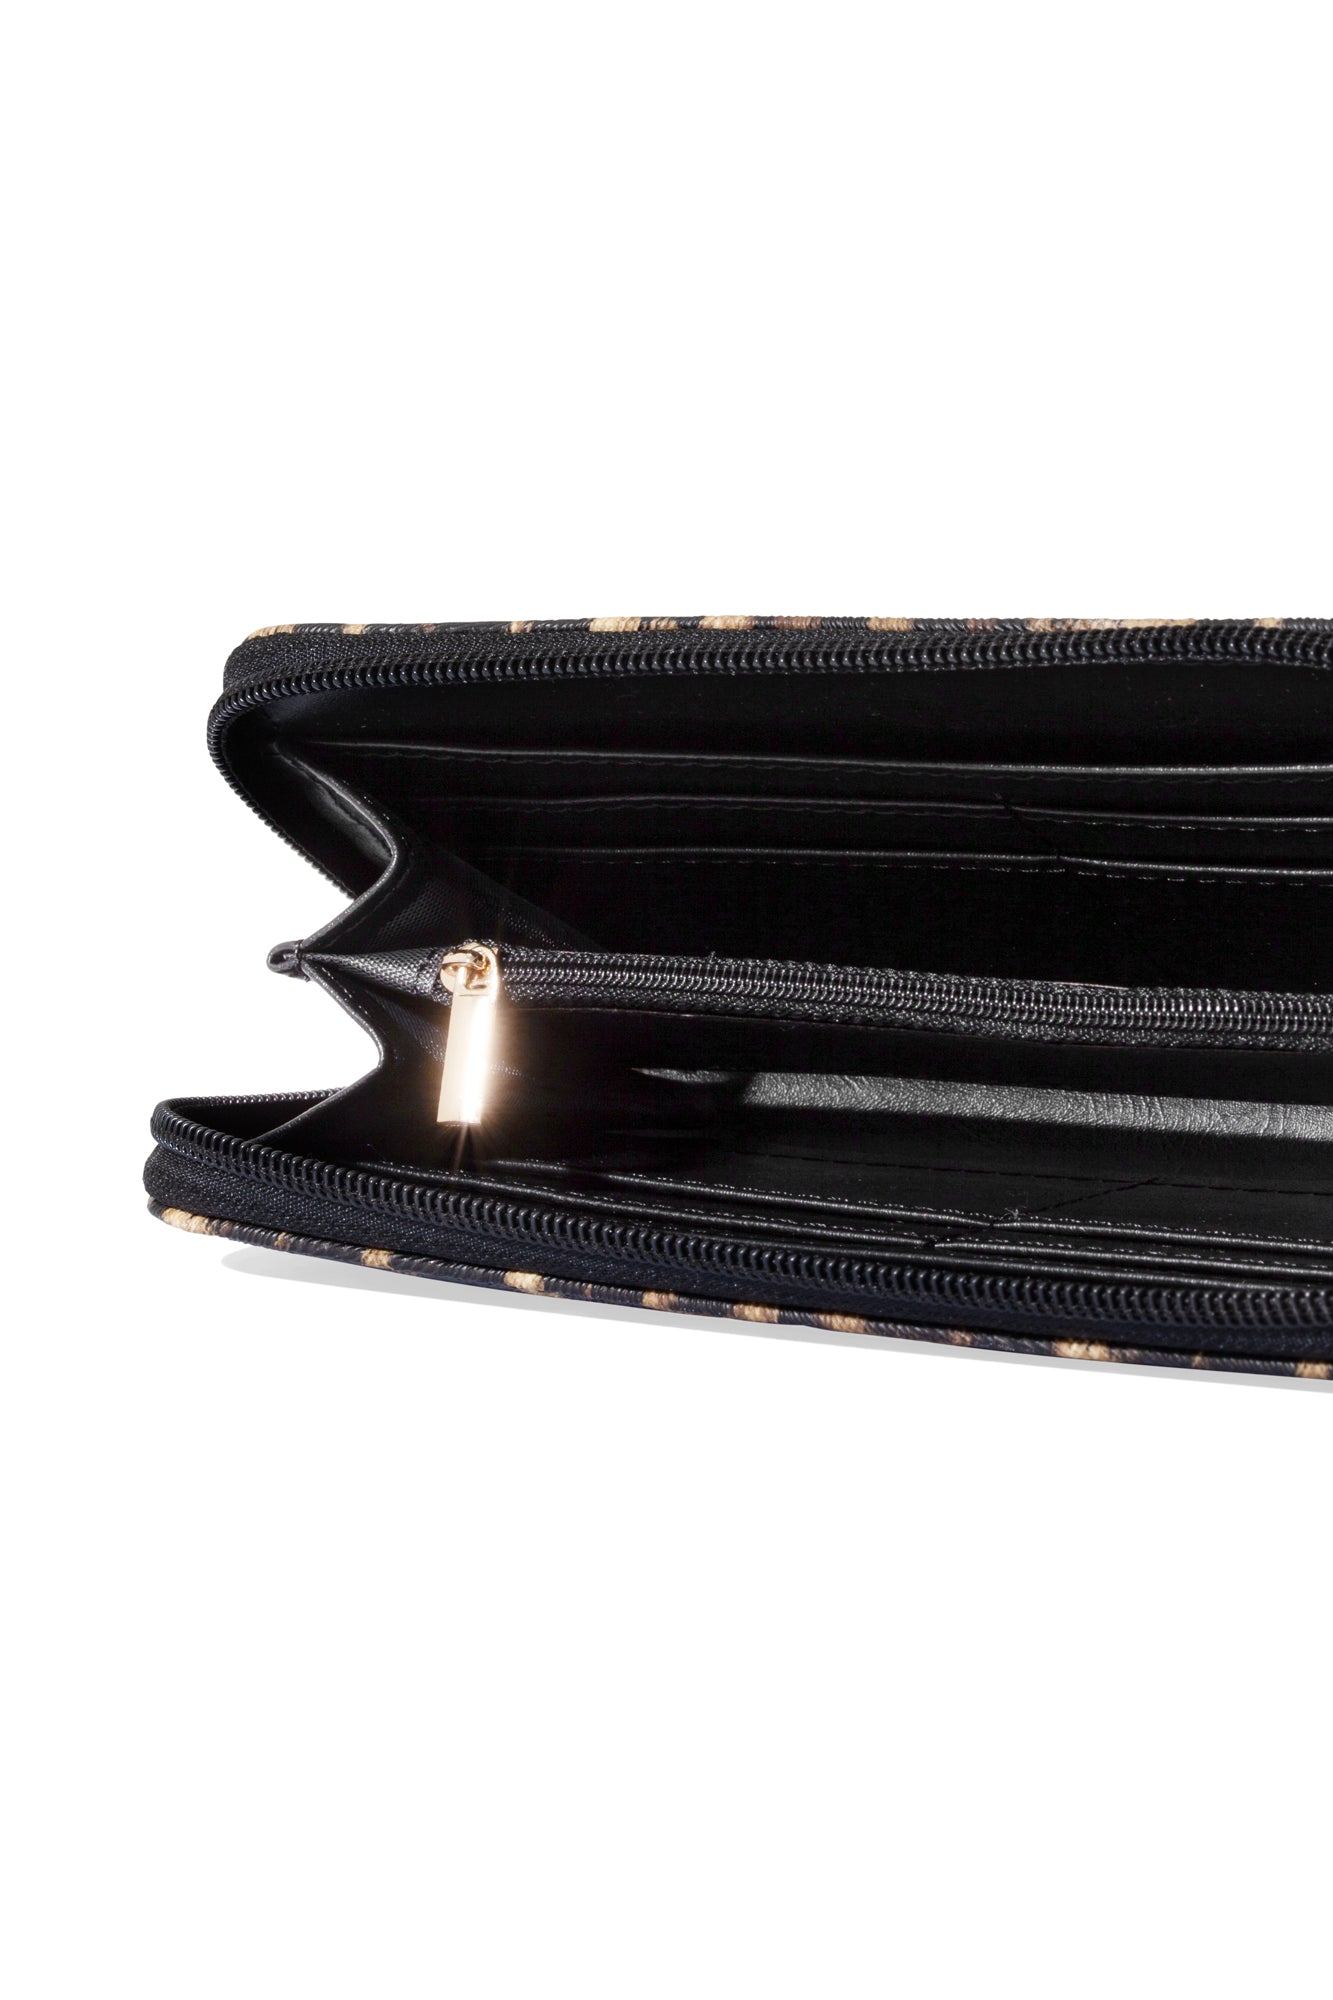 Black interior wallet compartments with gold zipper